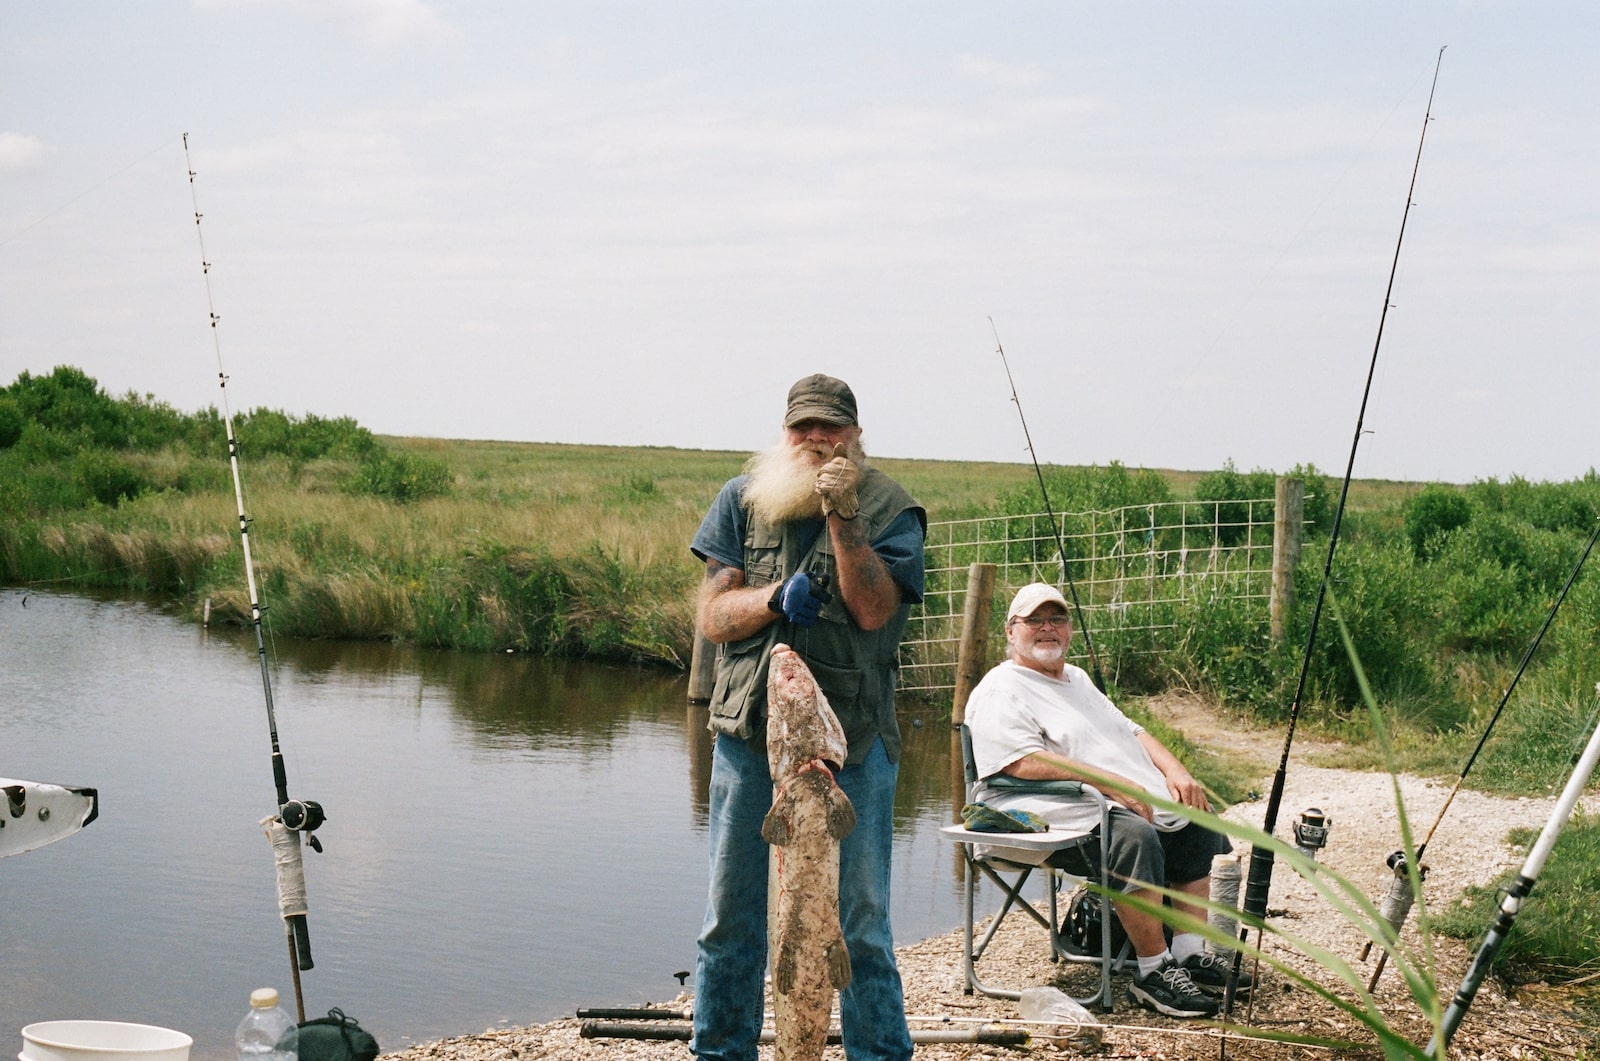 a man with a beard holds a large fish while another man sits in a chair behind him near a body of marshy water